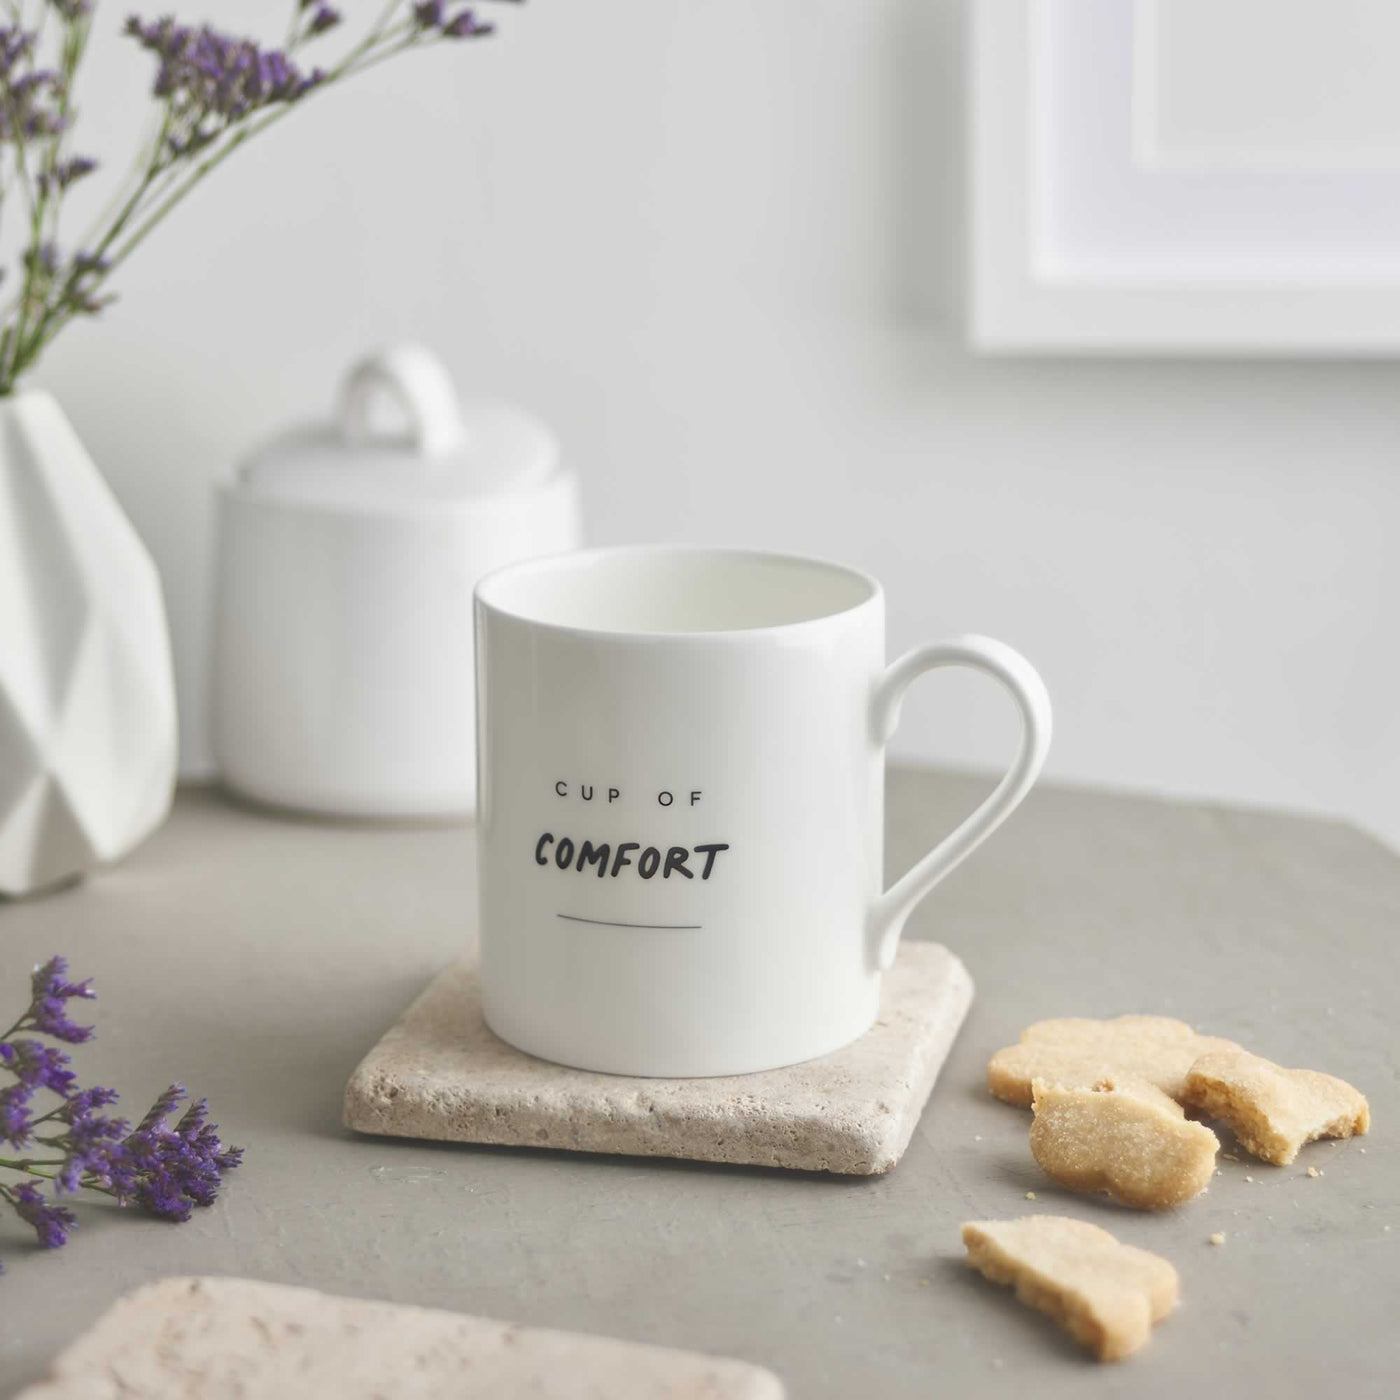 Cup of Comfort Mug with biscuits